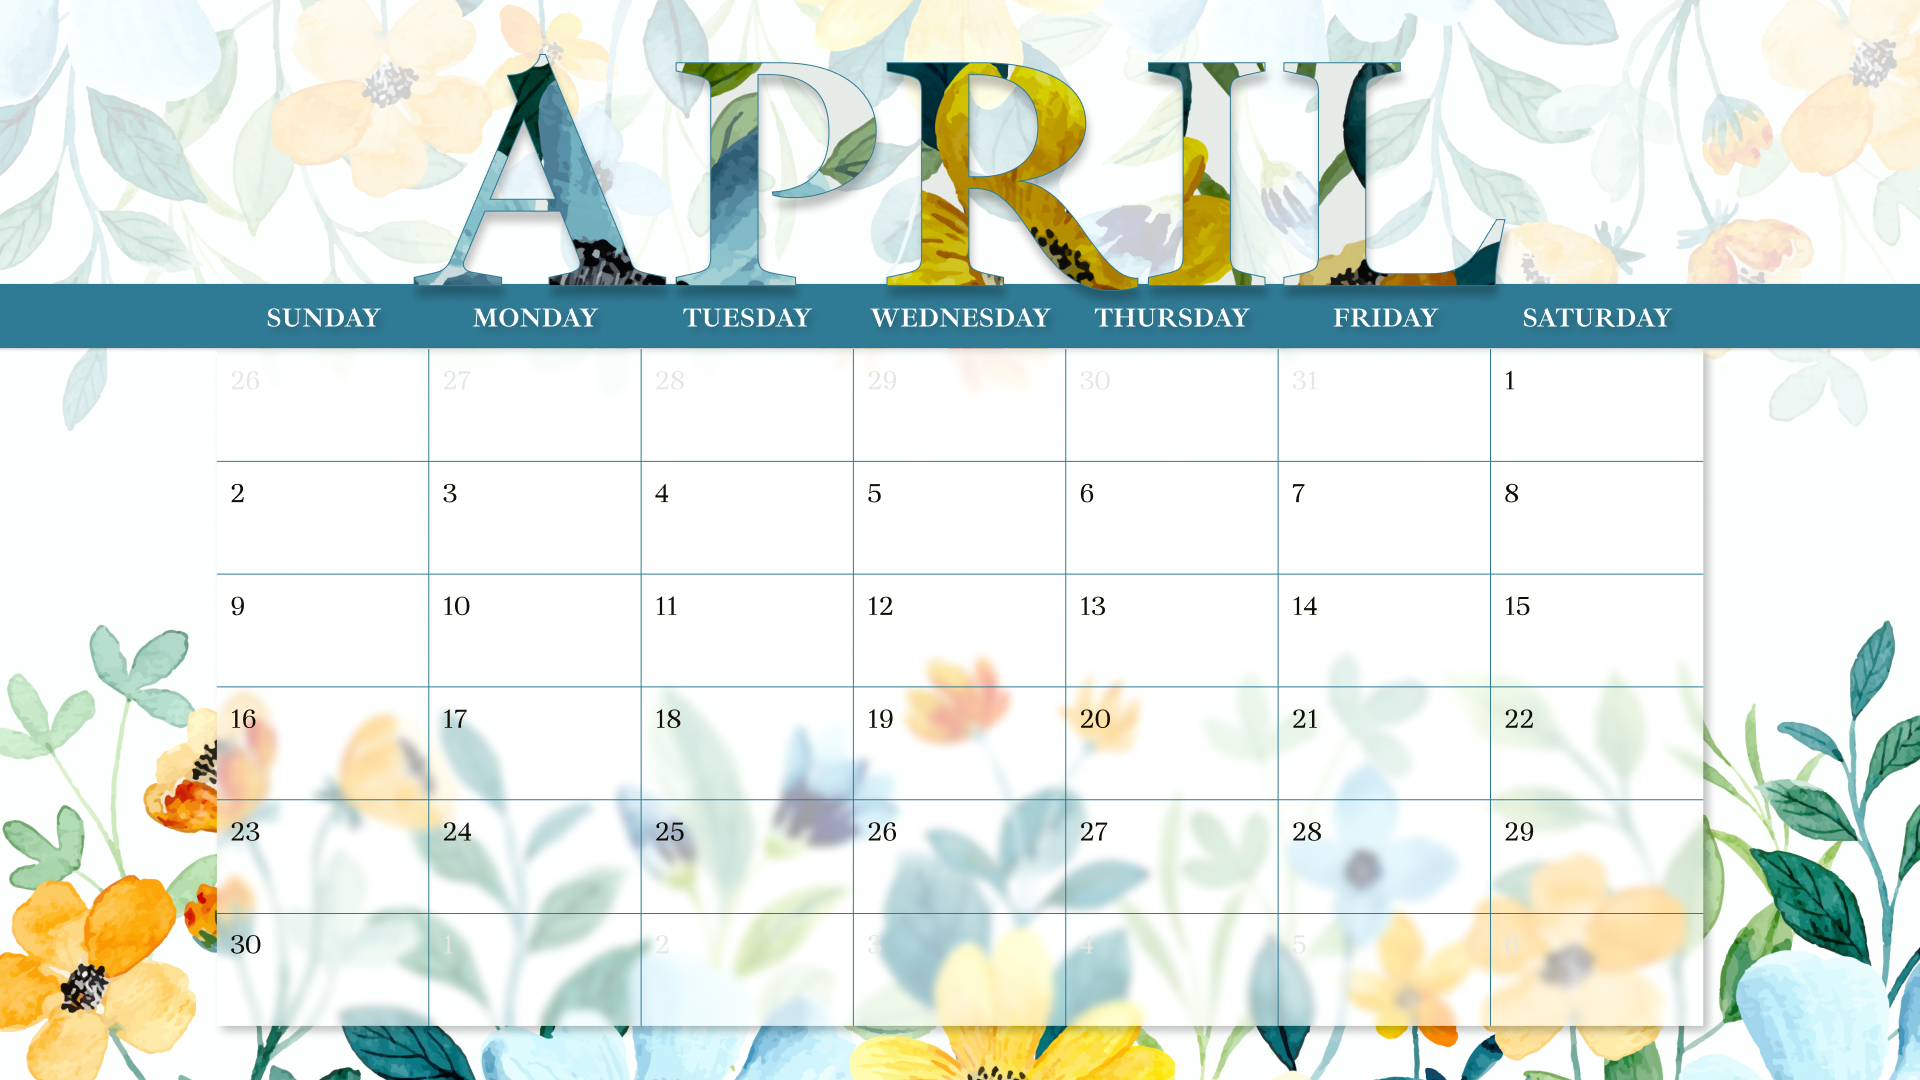 Calendar with a floral design on it.